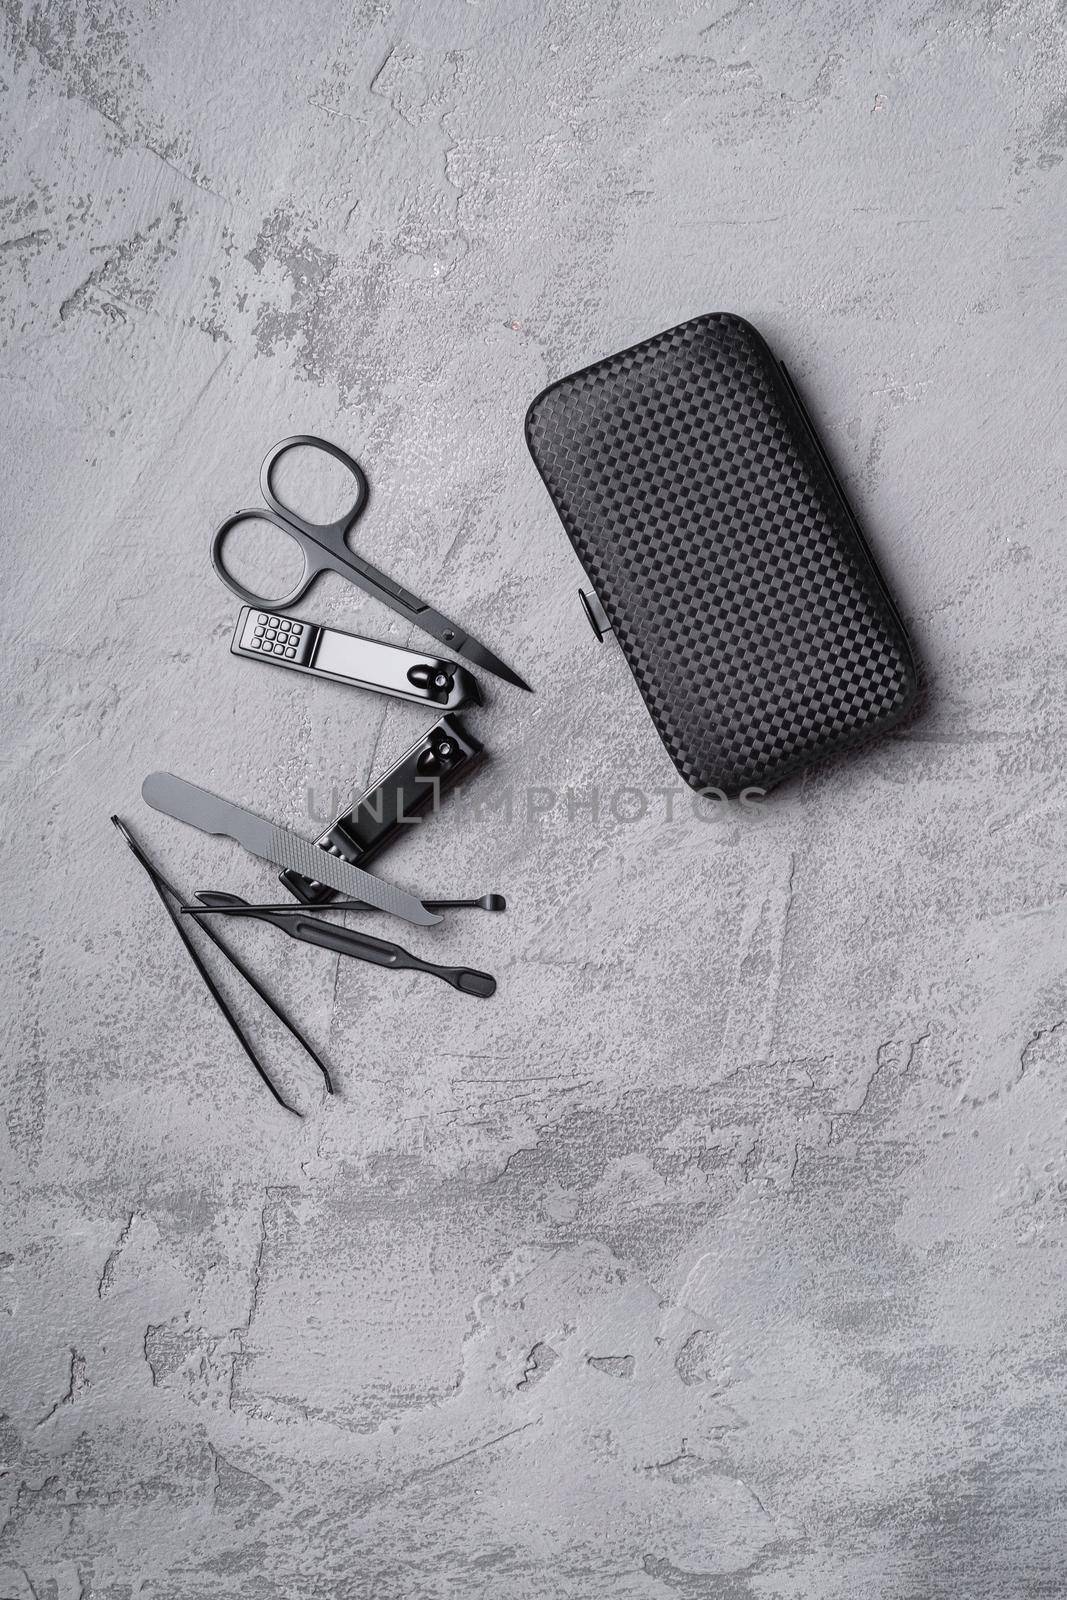 Set of manicure, pedicure tools and accessories with case, stone concrete background, top view by Frostroomhead